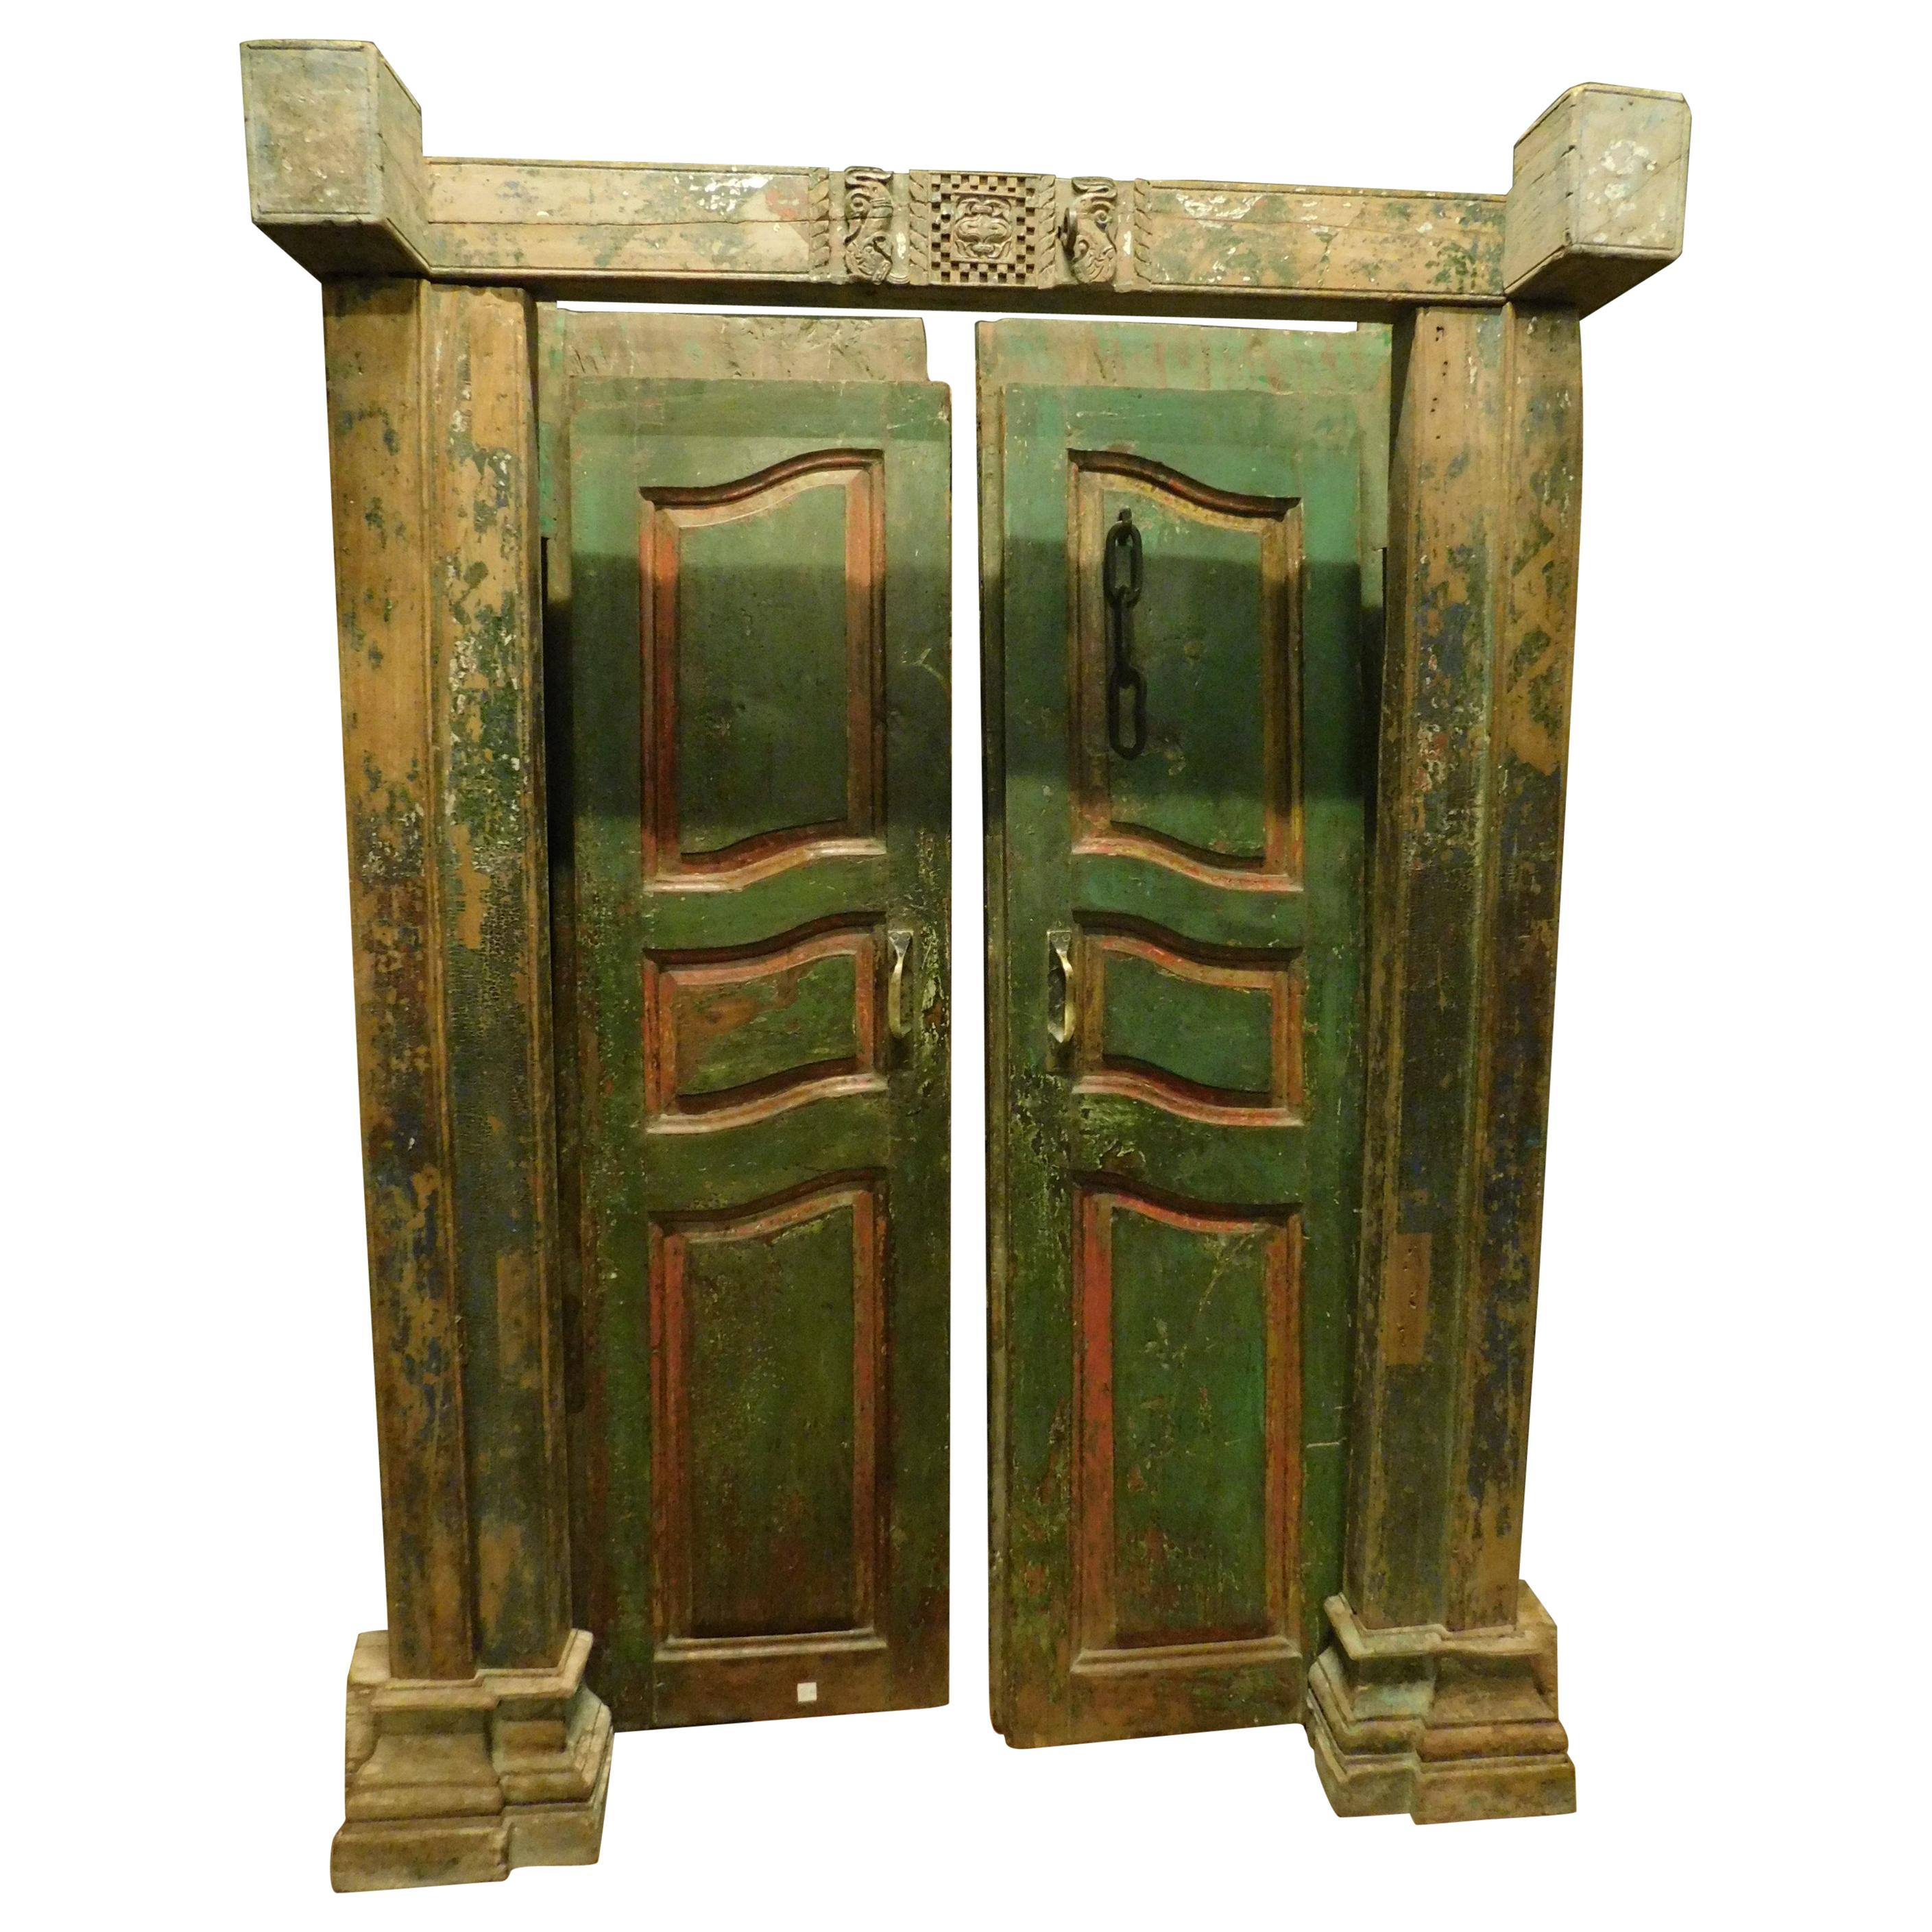 Antique Entrance Door in Green and Red Lacquered Wood, Ethnic Style, 1700